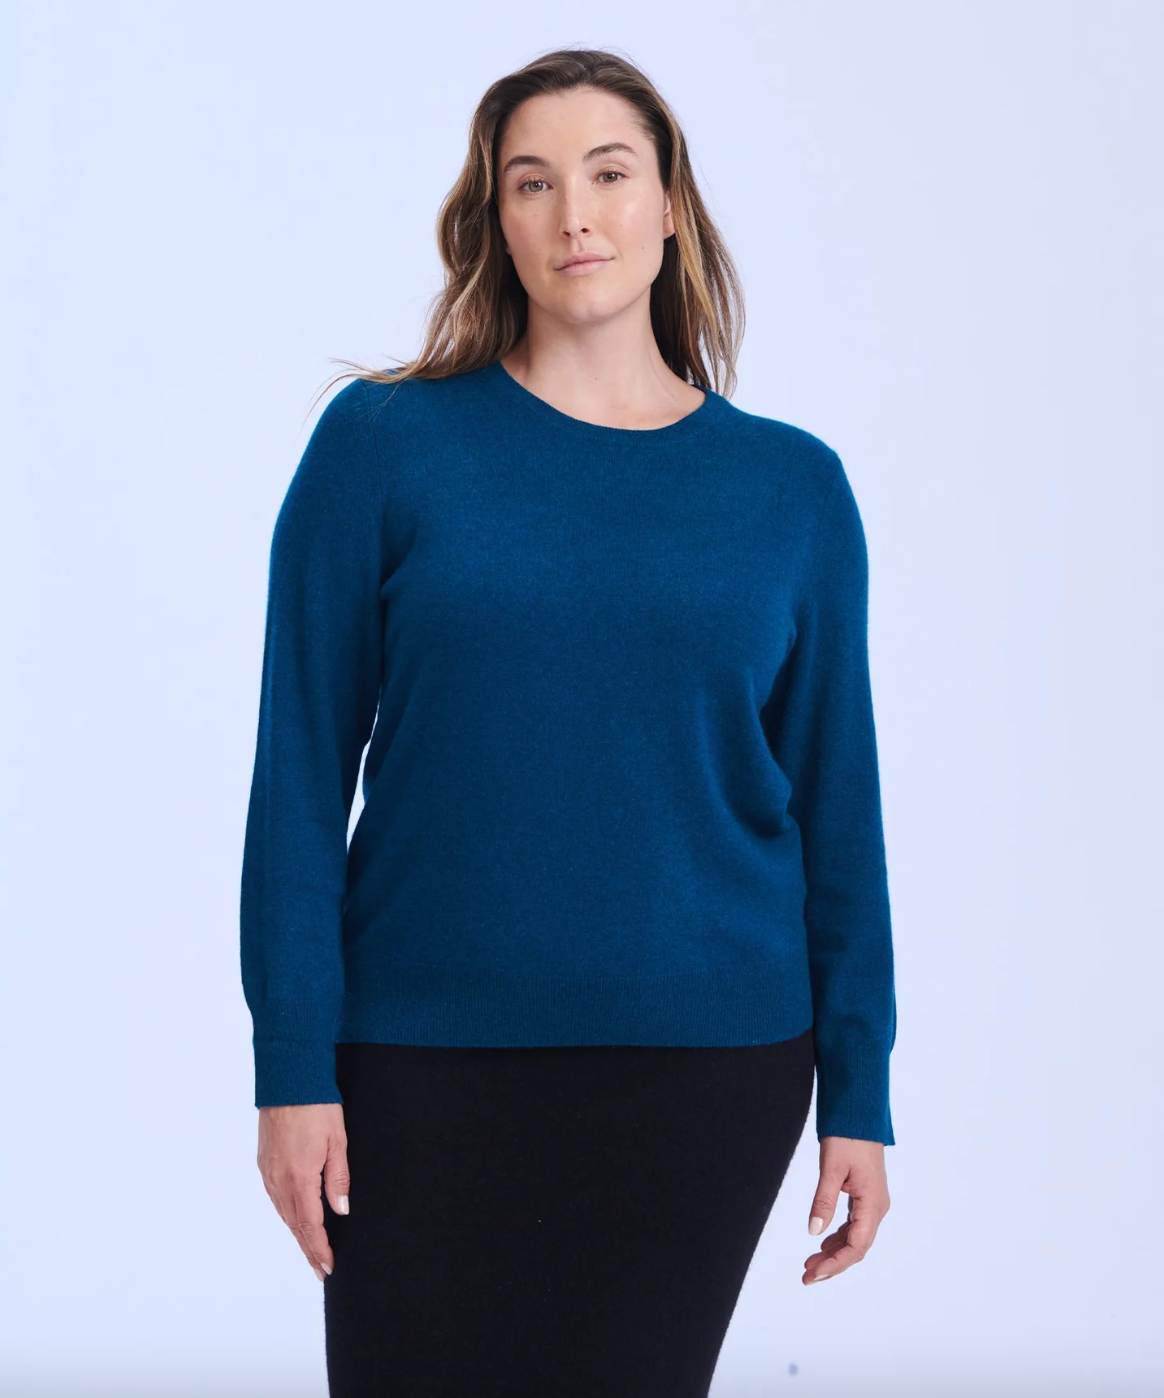 Shop The 15 Best Fall Sweaters For Women 2023